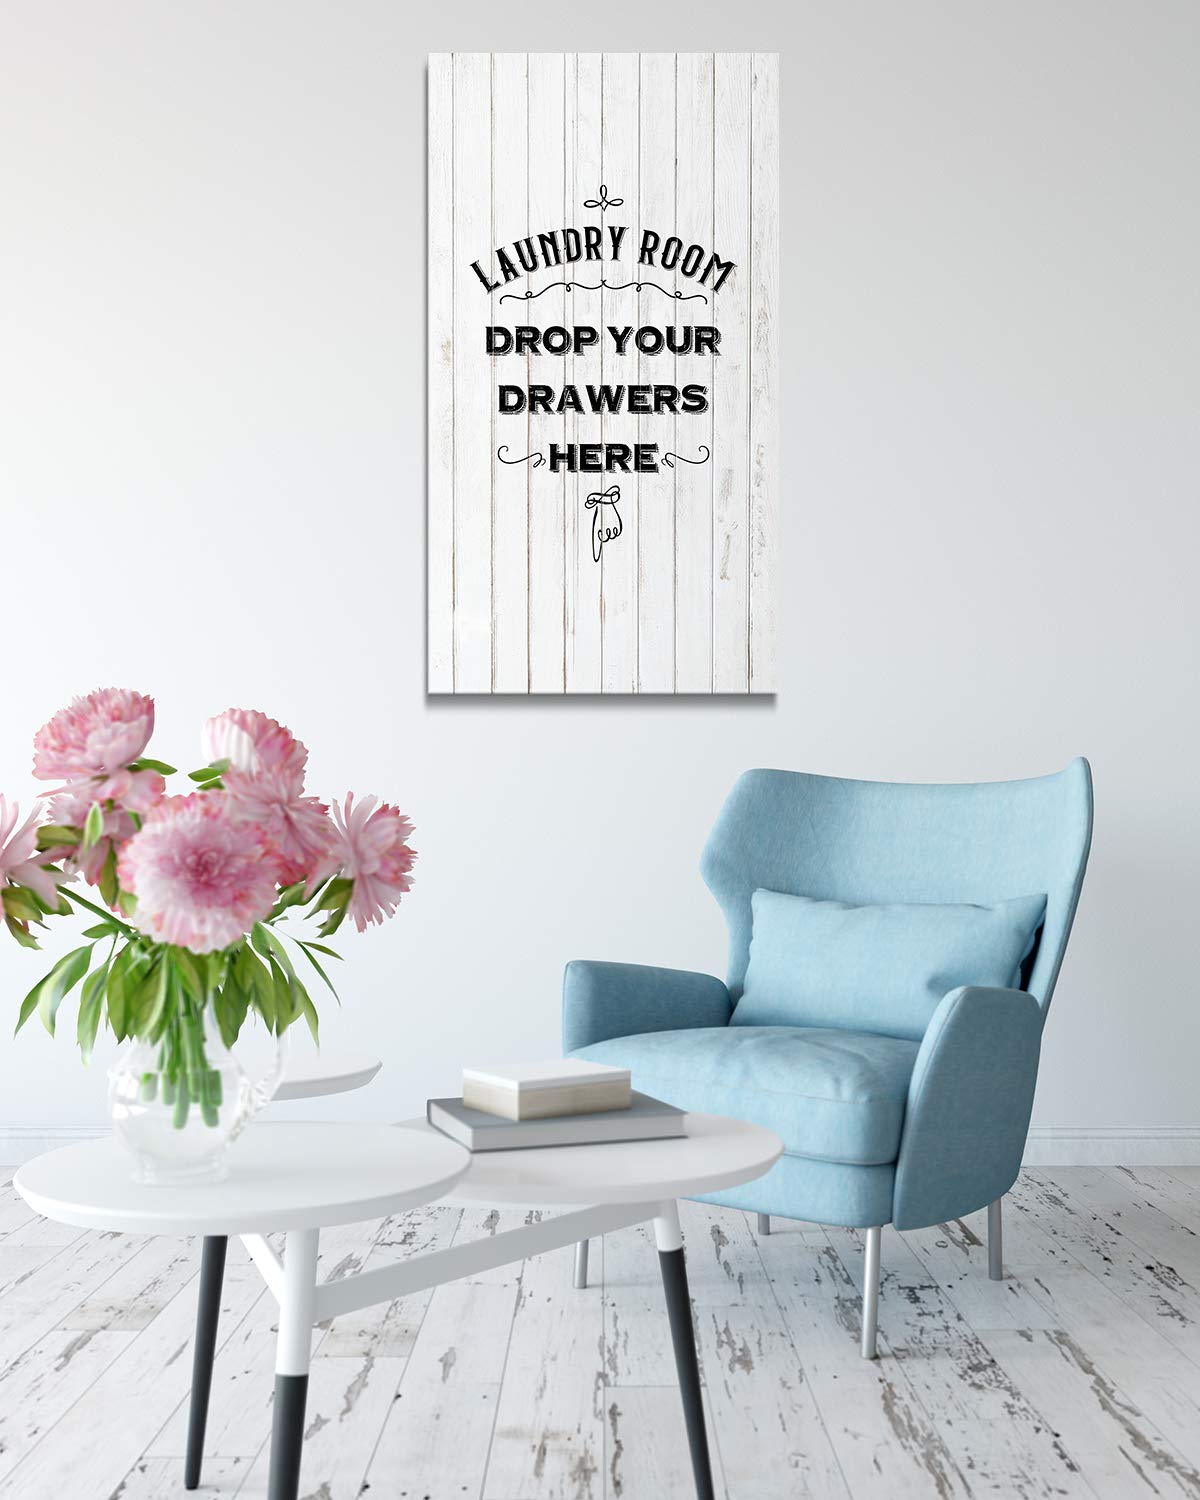 Laundry Room Drop Your Drawers Here - Wall Decor Art Canvas on a white woodgrain background - Ready to Hang - Great for a laundry room or kitchen